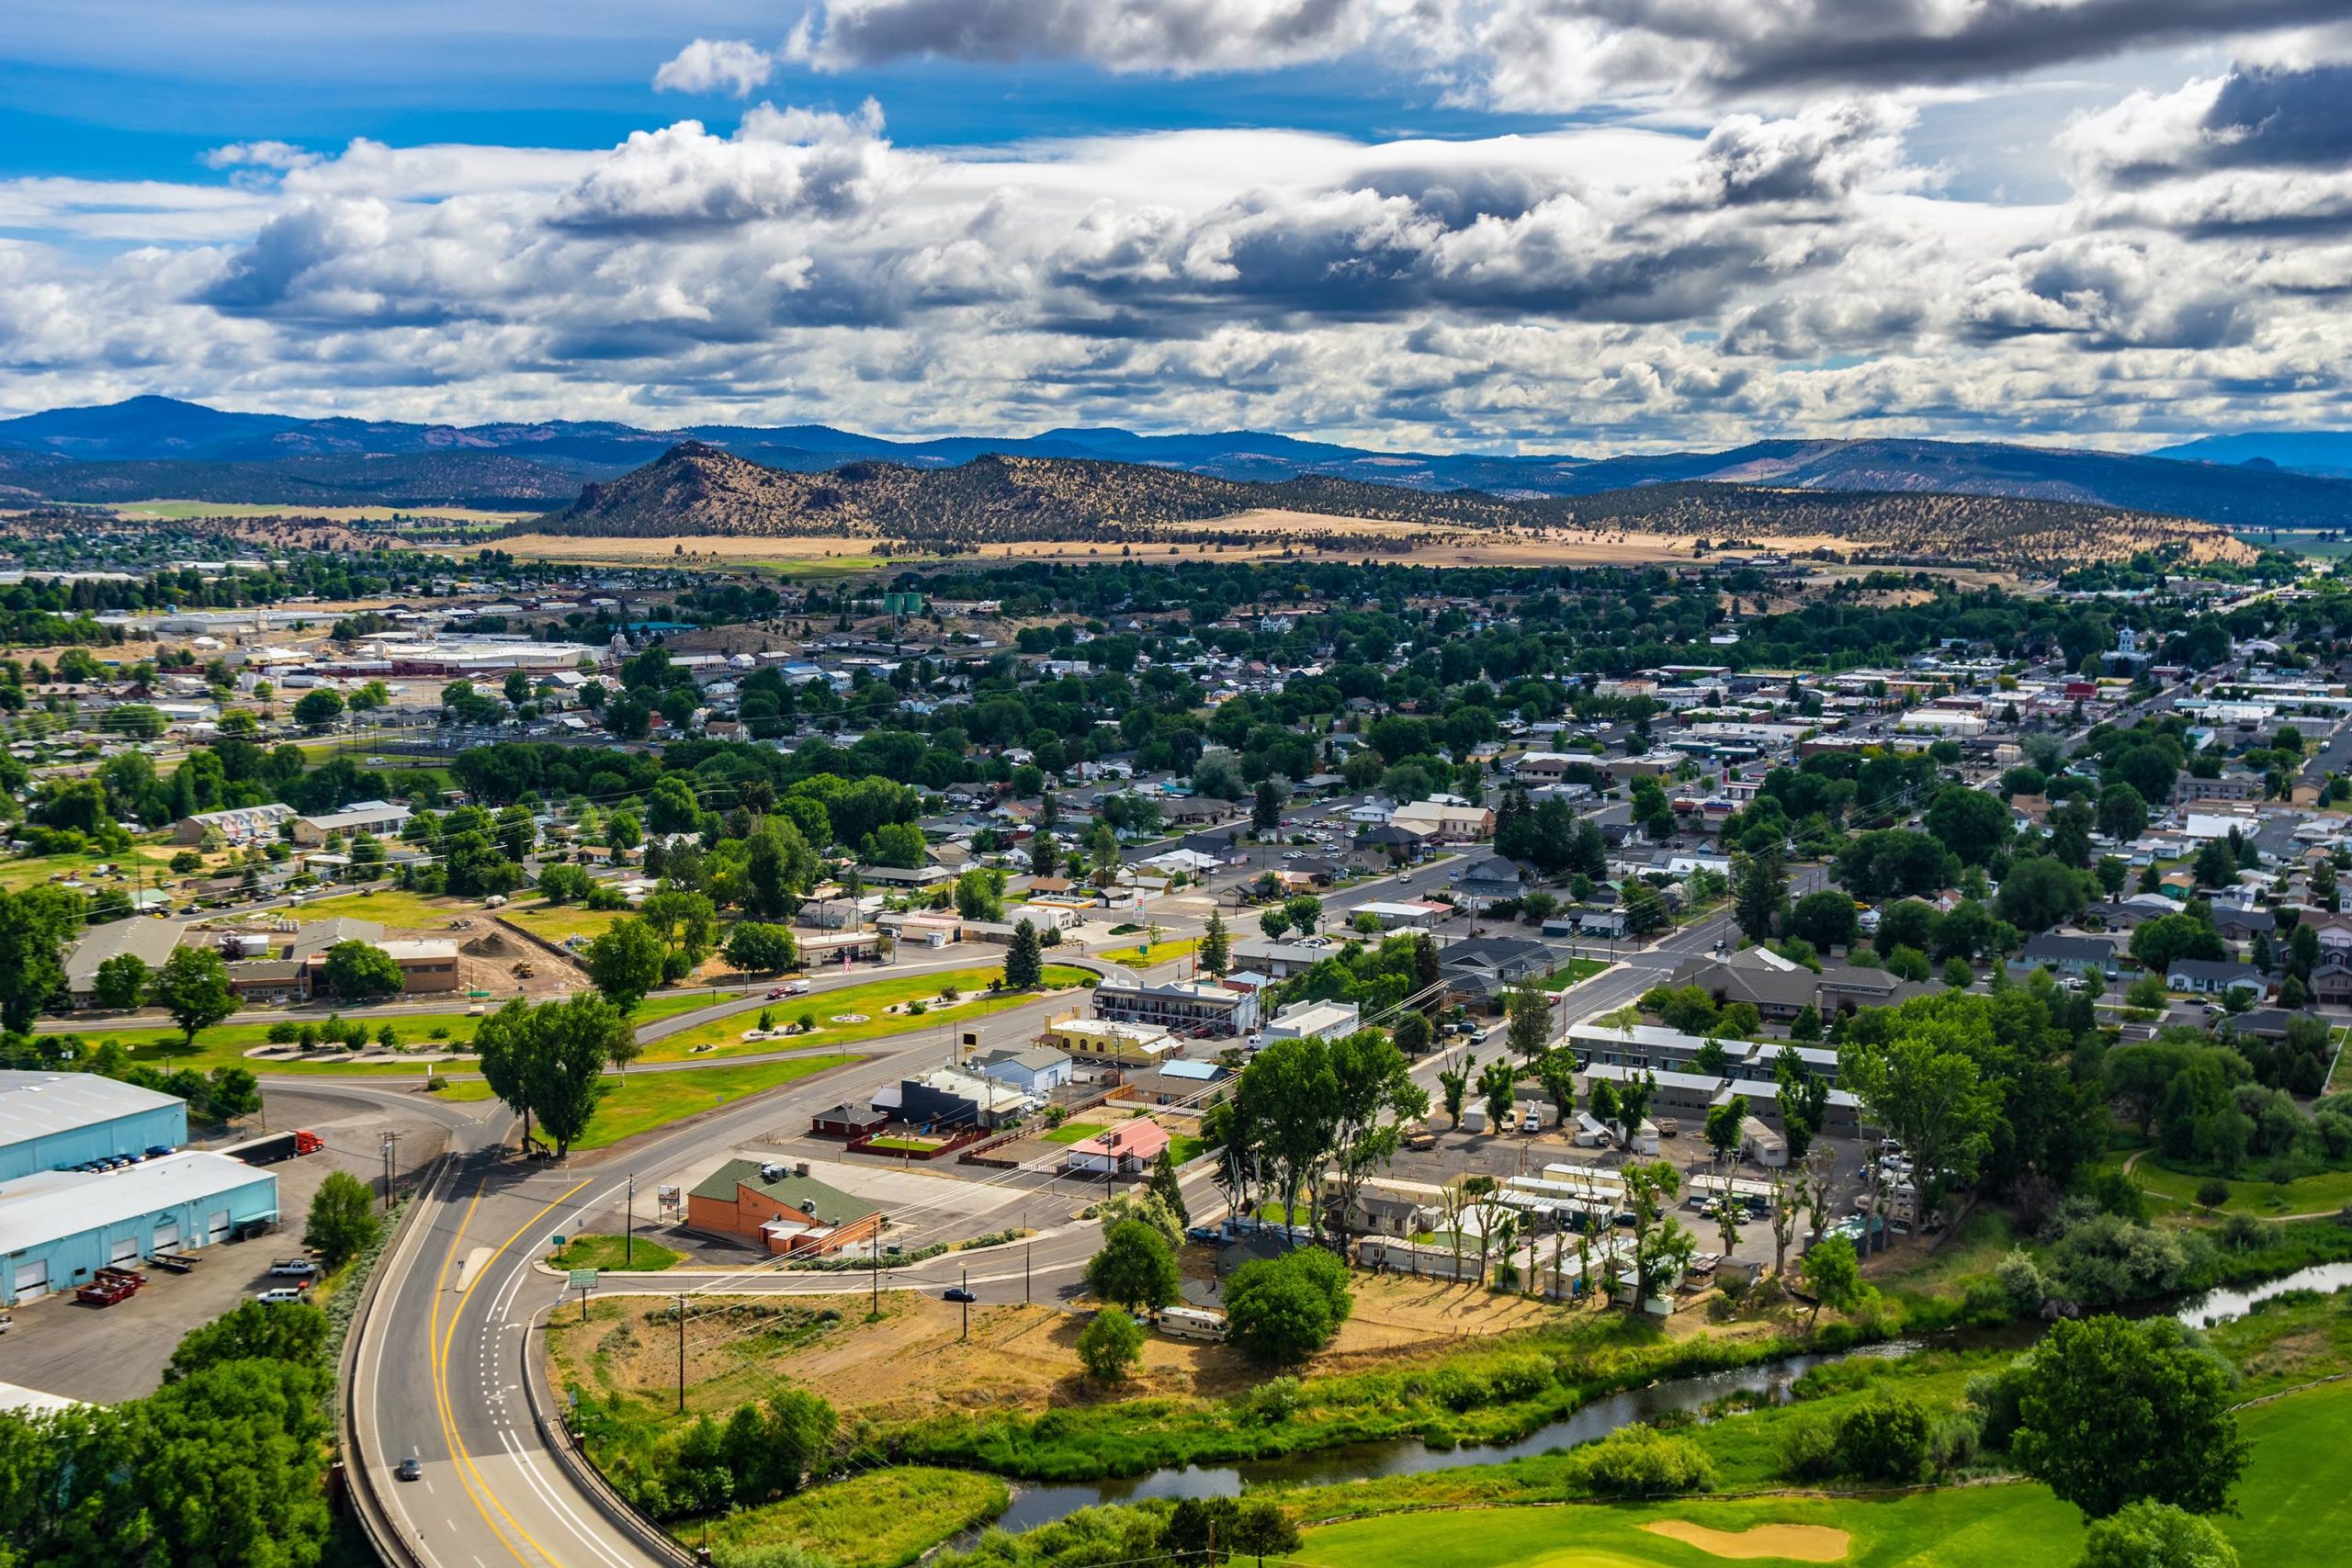 Overlooking view at Prineville from Ochoco Wayside State Park viewpoint, Central Oregon, USA.